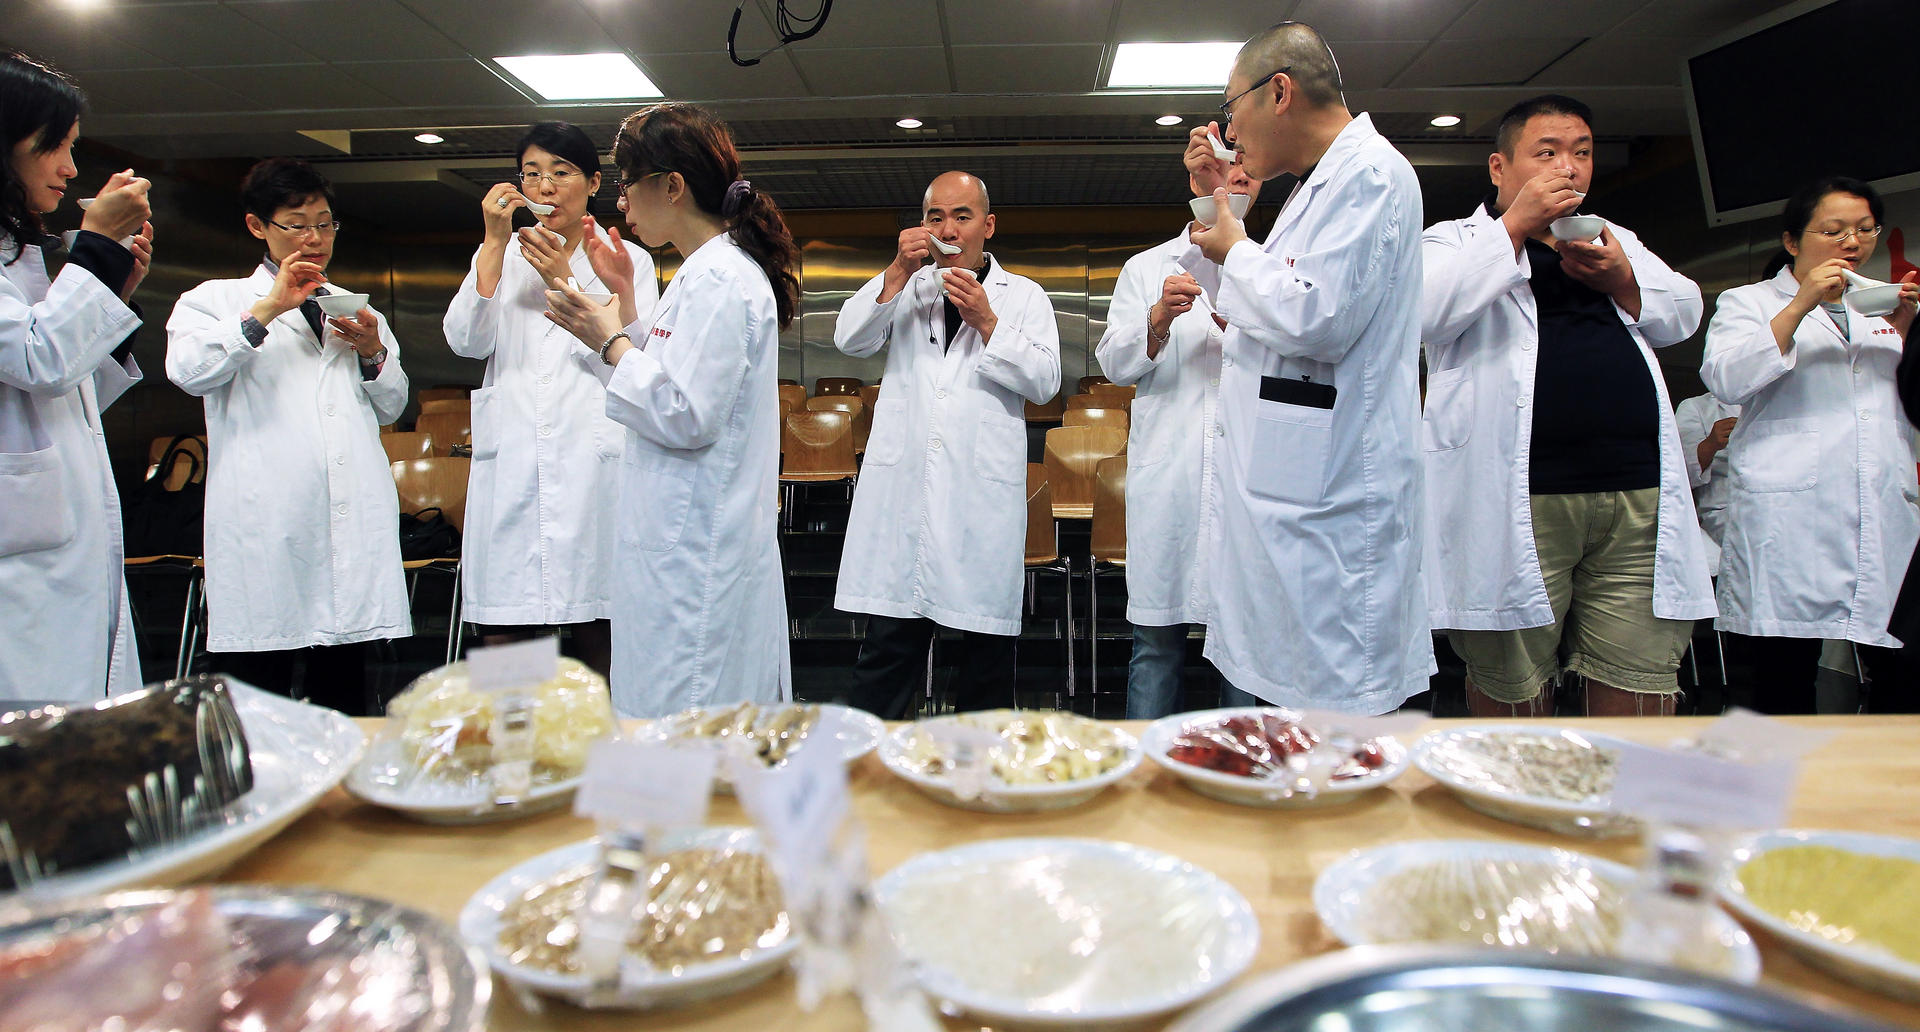 The Chinese Cuisine Training Institute's tonic foods course puts theory into practice with cooking sessions in the kitchen.Photos: Jonathan Wong